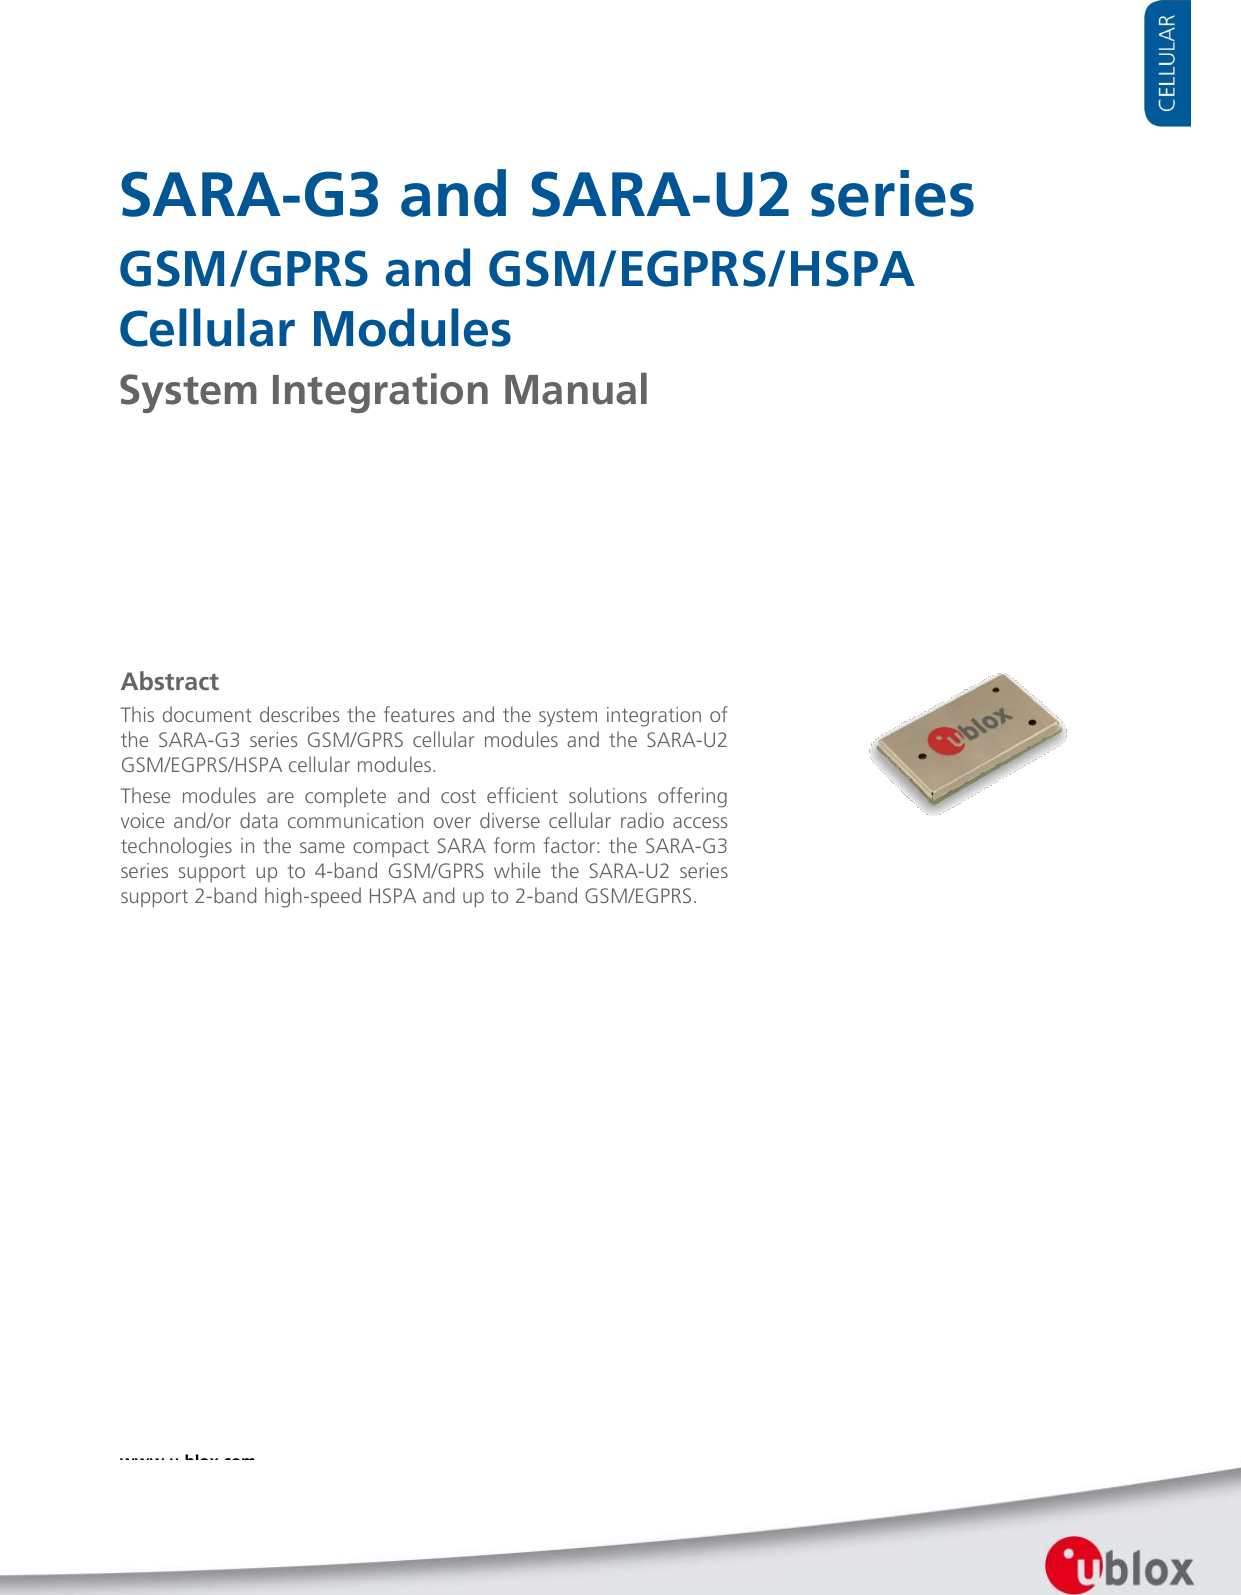    SARA-G3 and SARA-U2 series GSM/GPRS and GSM/EGPRS/HSPA  Cellular Modules System Integration Manual                   Abstract This document describes the features and the system integration of the SARA-G3 series GSM/GPRS cellular modules and the SARA-U2 GSM/EGPRS/HSPA cellular modules. These modules are complete and cost efficient solutions offering voice and/or data communication over diverse cellular radio access technologies in the same compact SARA form factor: the SARA-G3 series support up to 4-band  GSM/GPRS while the SARA-U2 series support 2-band high-speed HSPA and up to 2-band GSM/EGPRS.  www.u-blox.com UBX-13000995 - R11  